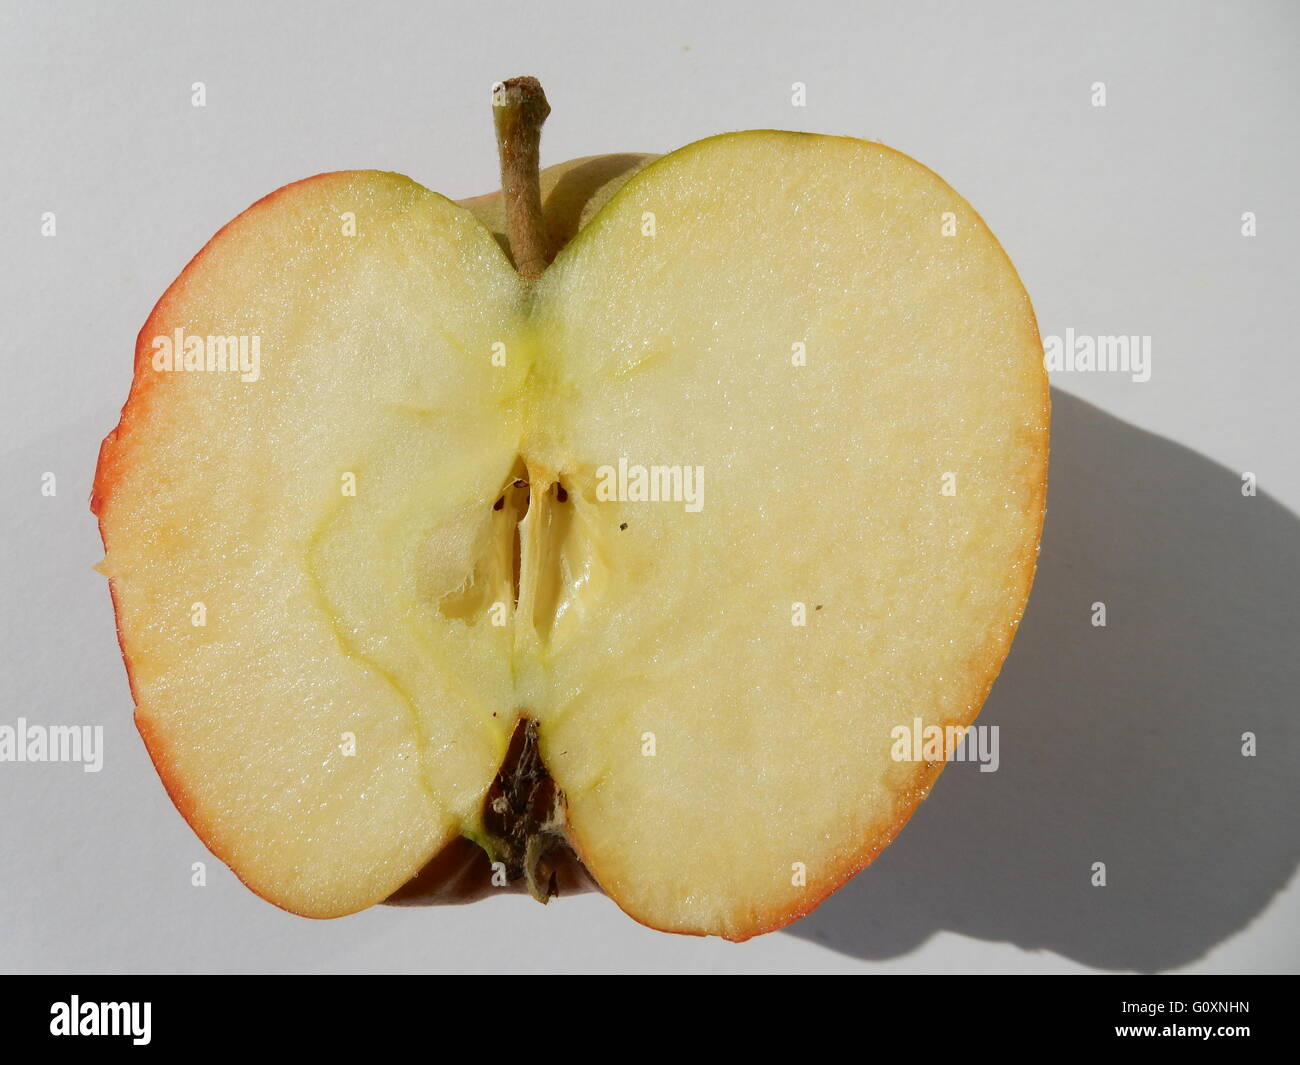 the half of an apple on a table Stock Photo